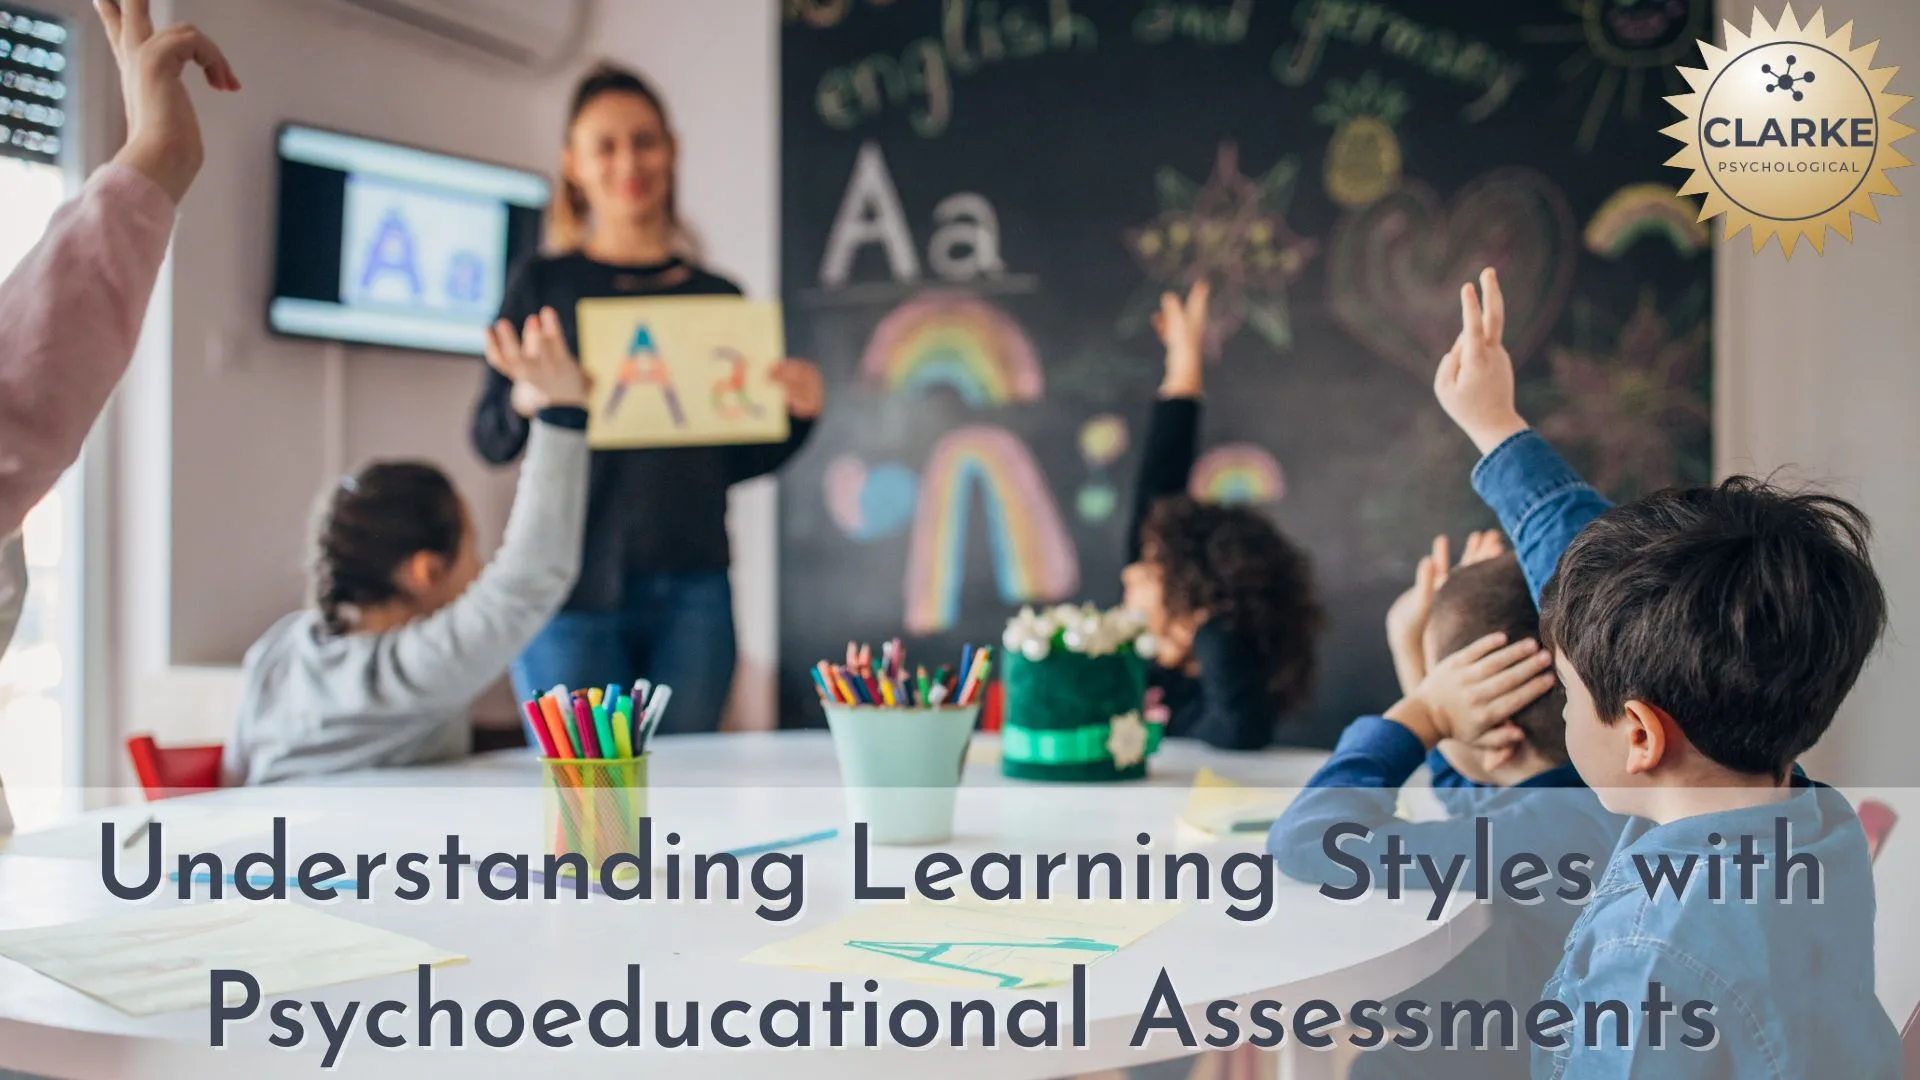 Understanding Learning Styles with Psychoeducational Assessments